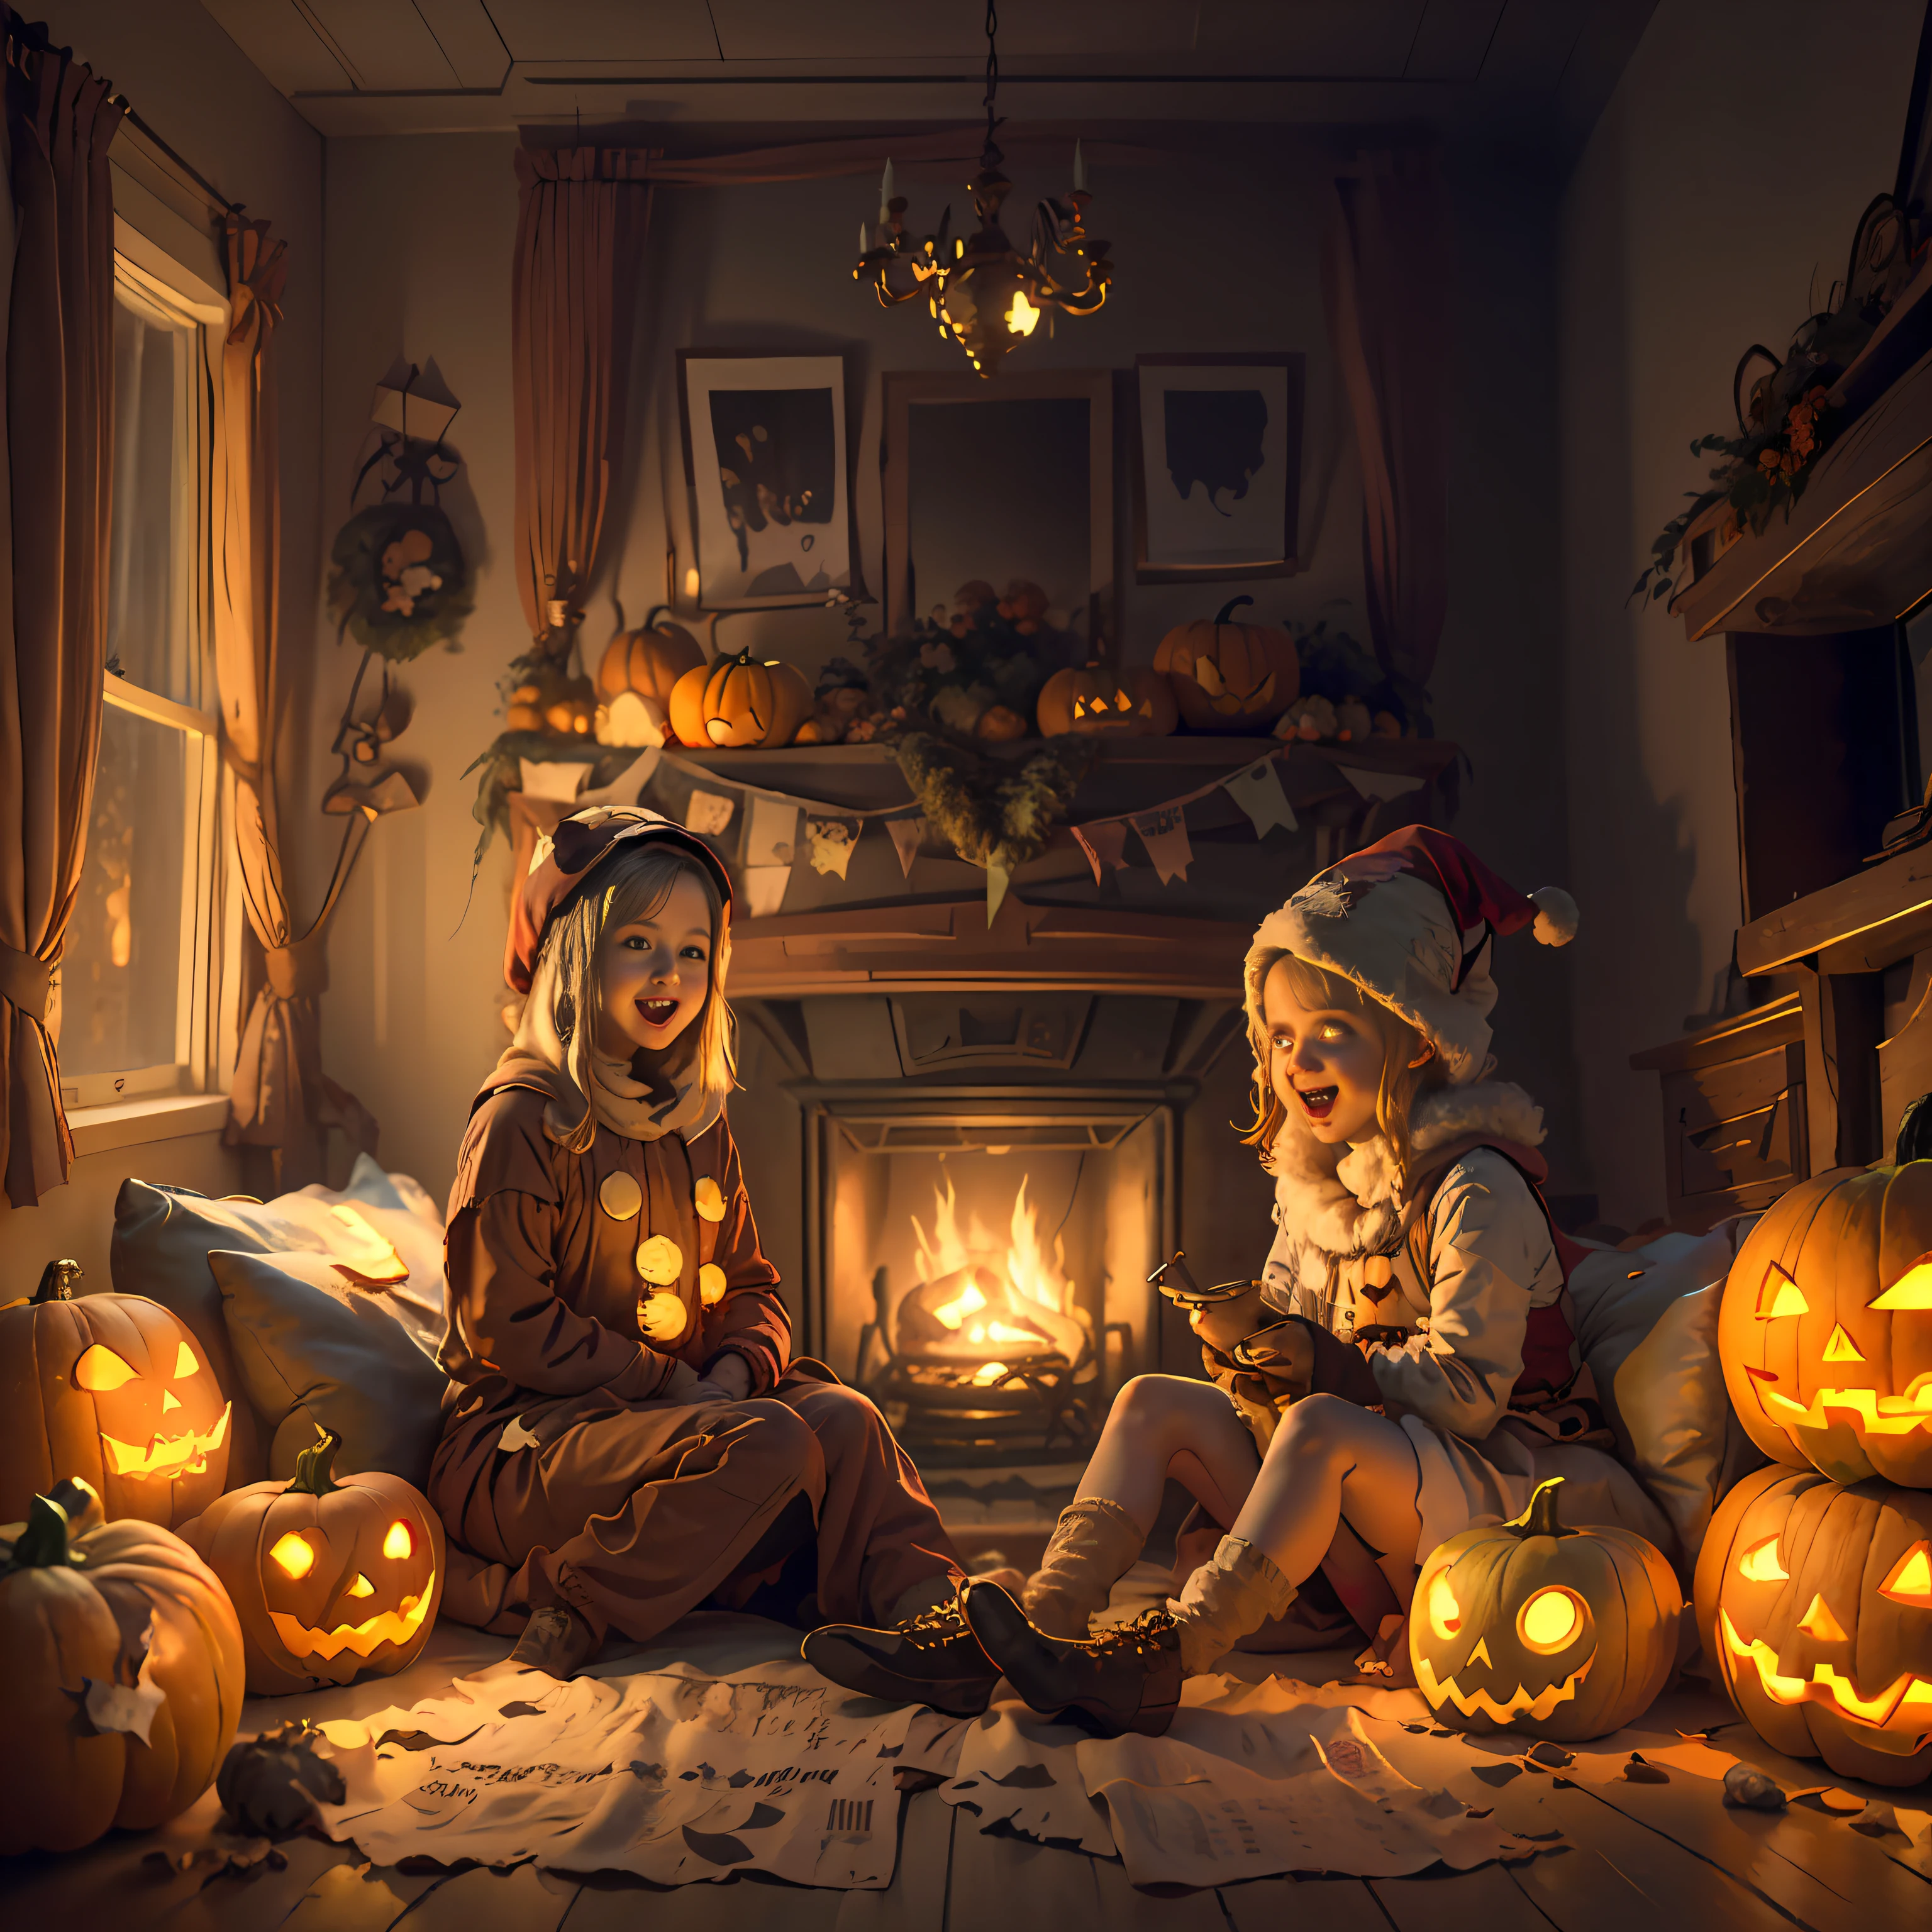 Halloween ghost banners, hung in cozy living rooms full of laughter and joy, children in cute costumes, surrounded by family, pumpkin decorations and ghostly props decorate the space, warm and seductive lights bring everyone together to celebrate the festive atmosphere of the festival. Realistic scene, real person, the expression of the girl on the right is cute and innocent, real person